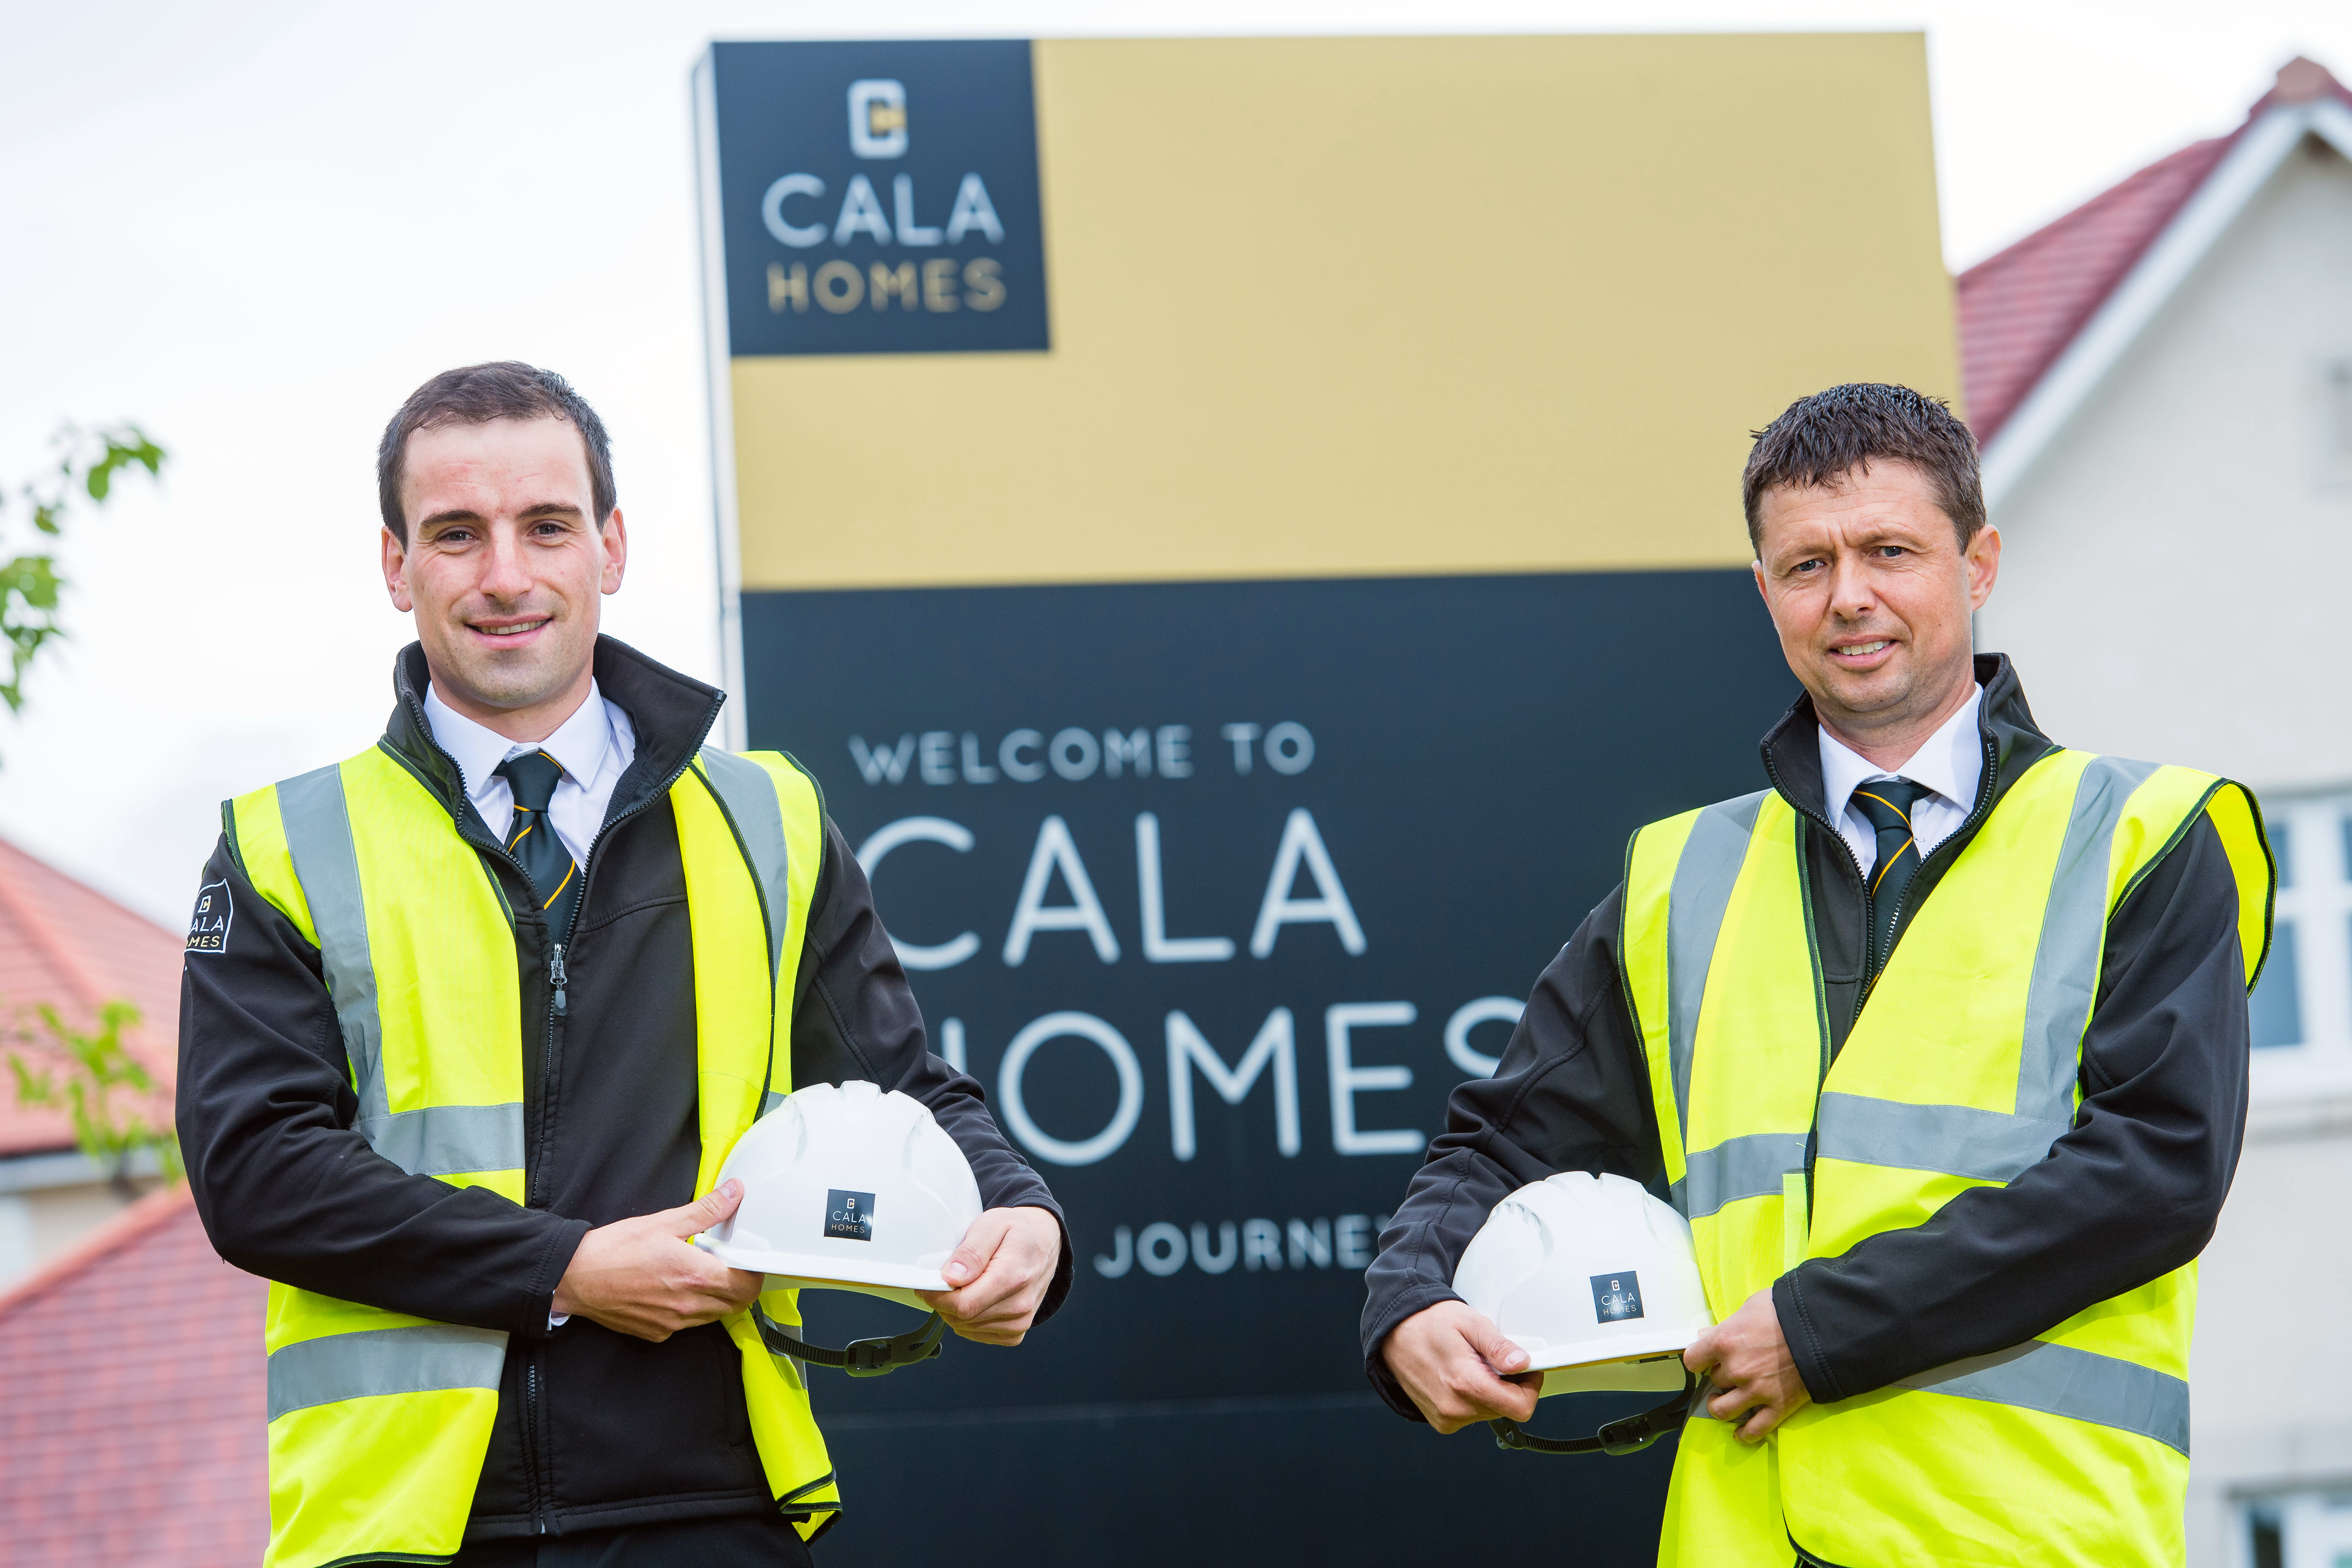 CALA site managers recognised for ‘Pride in the Job’